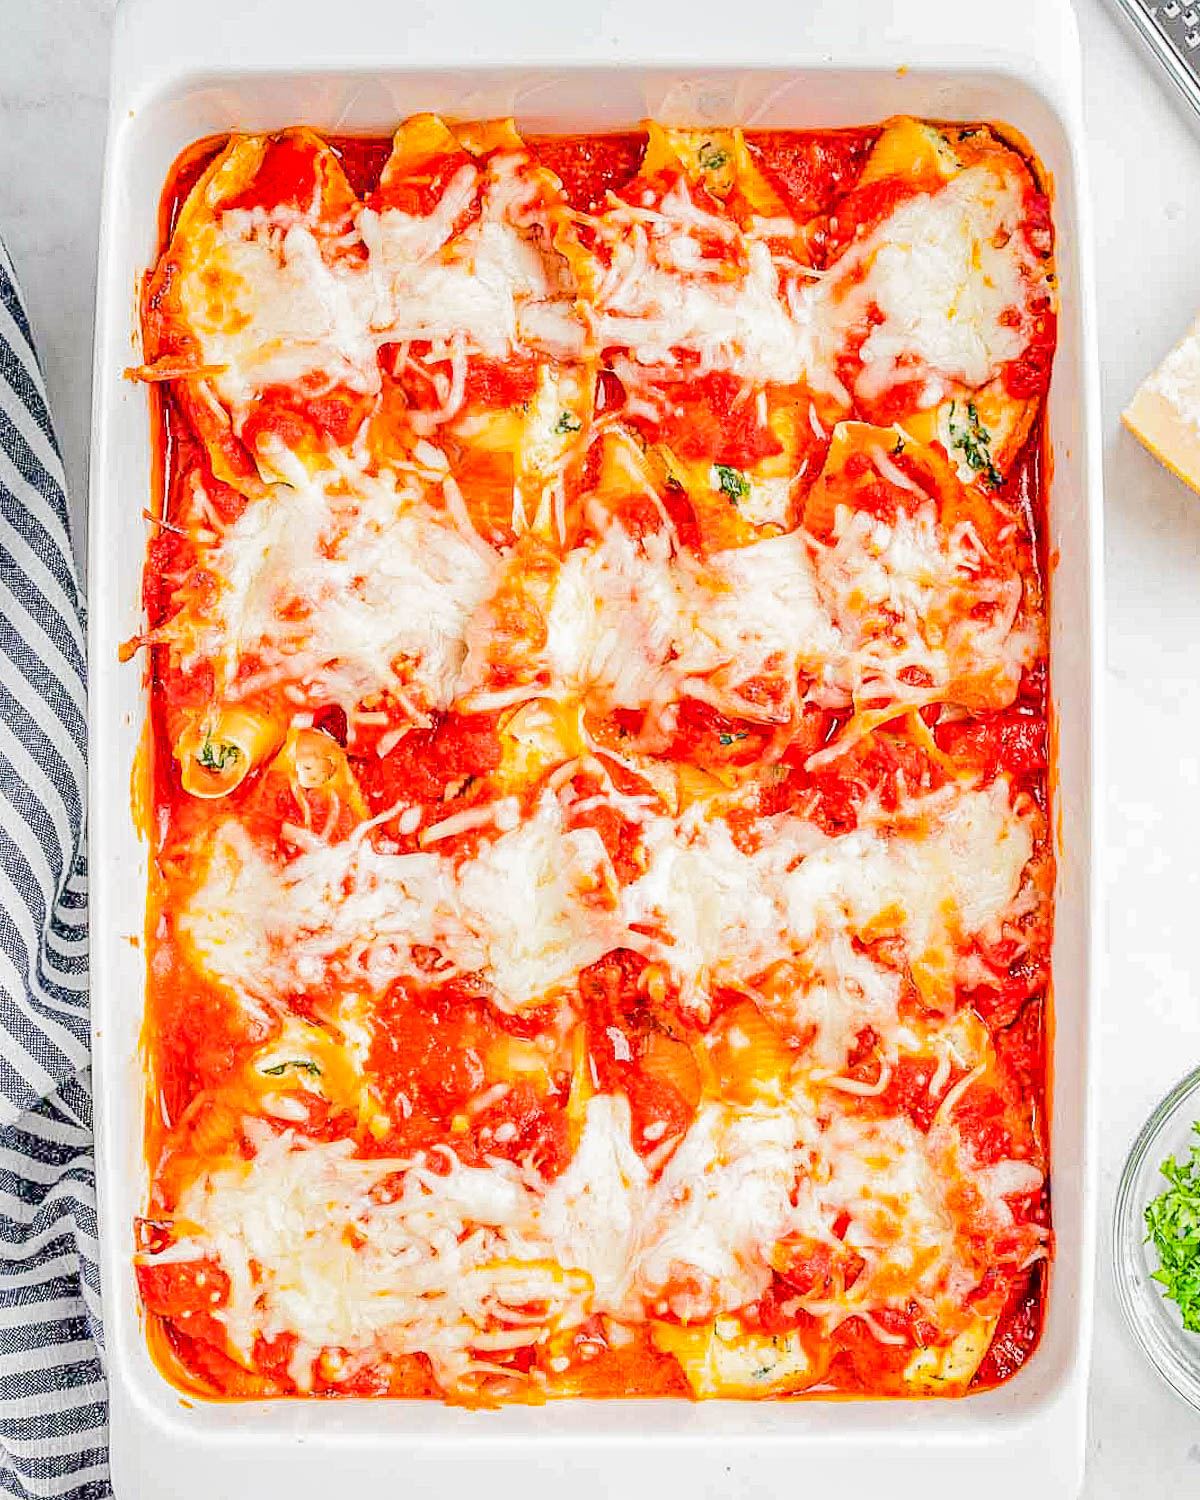 A baking dish containing freshly baked stuffed shells with melted cheese and tomato sauce.